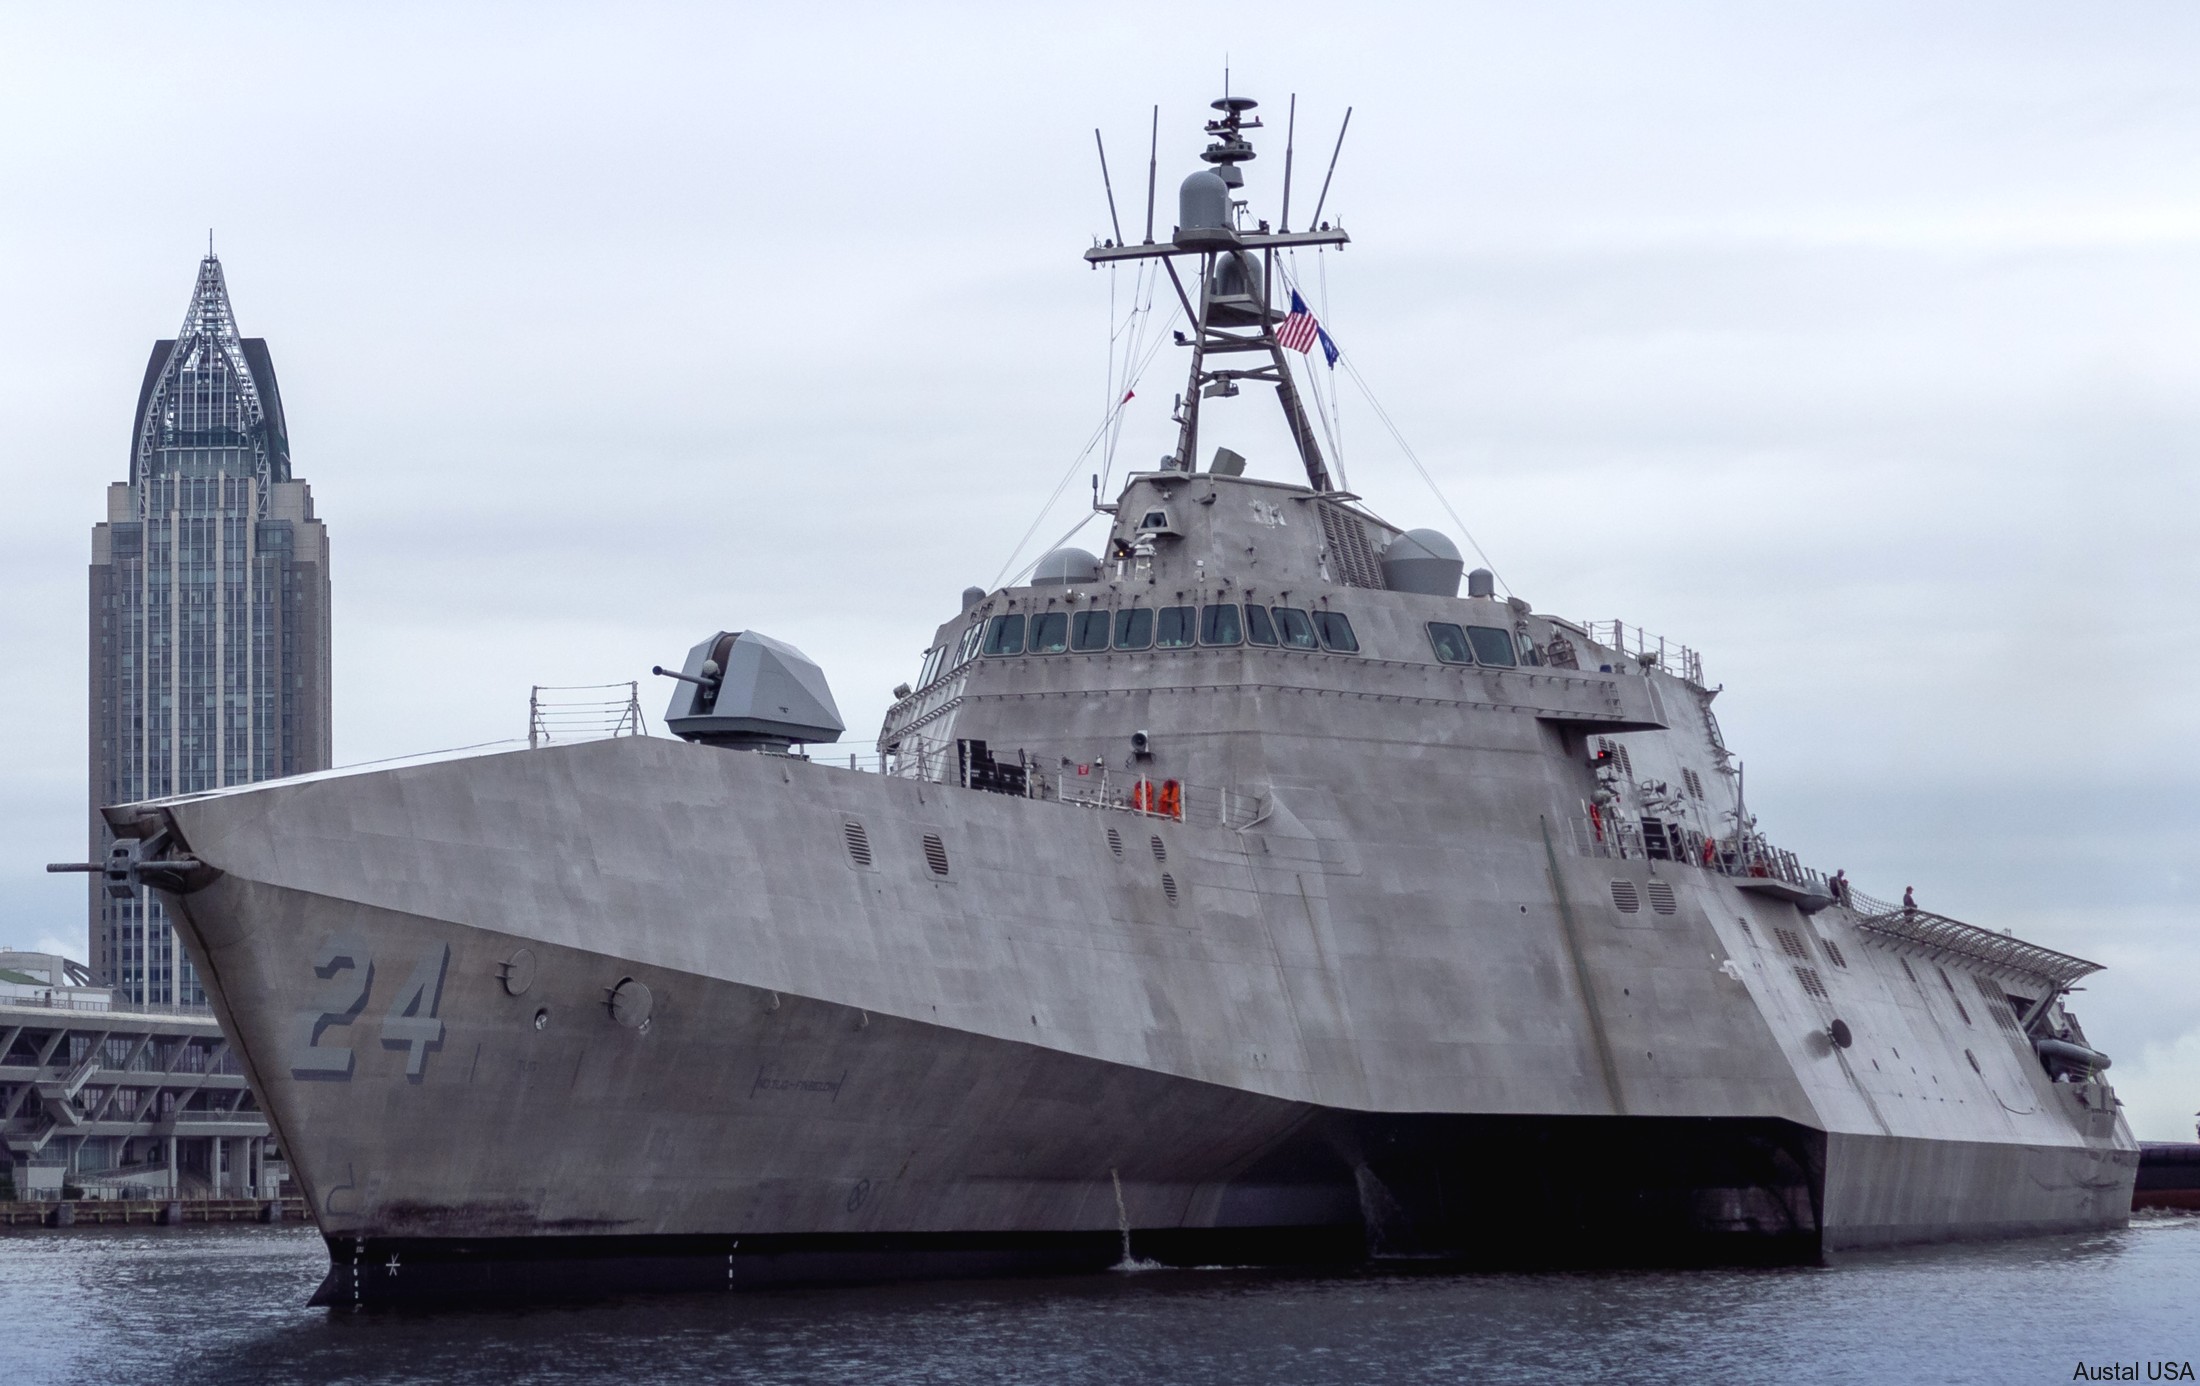 lcs-24 uss oakland independence class littoral combat ship us navy 08